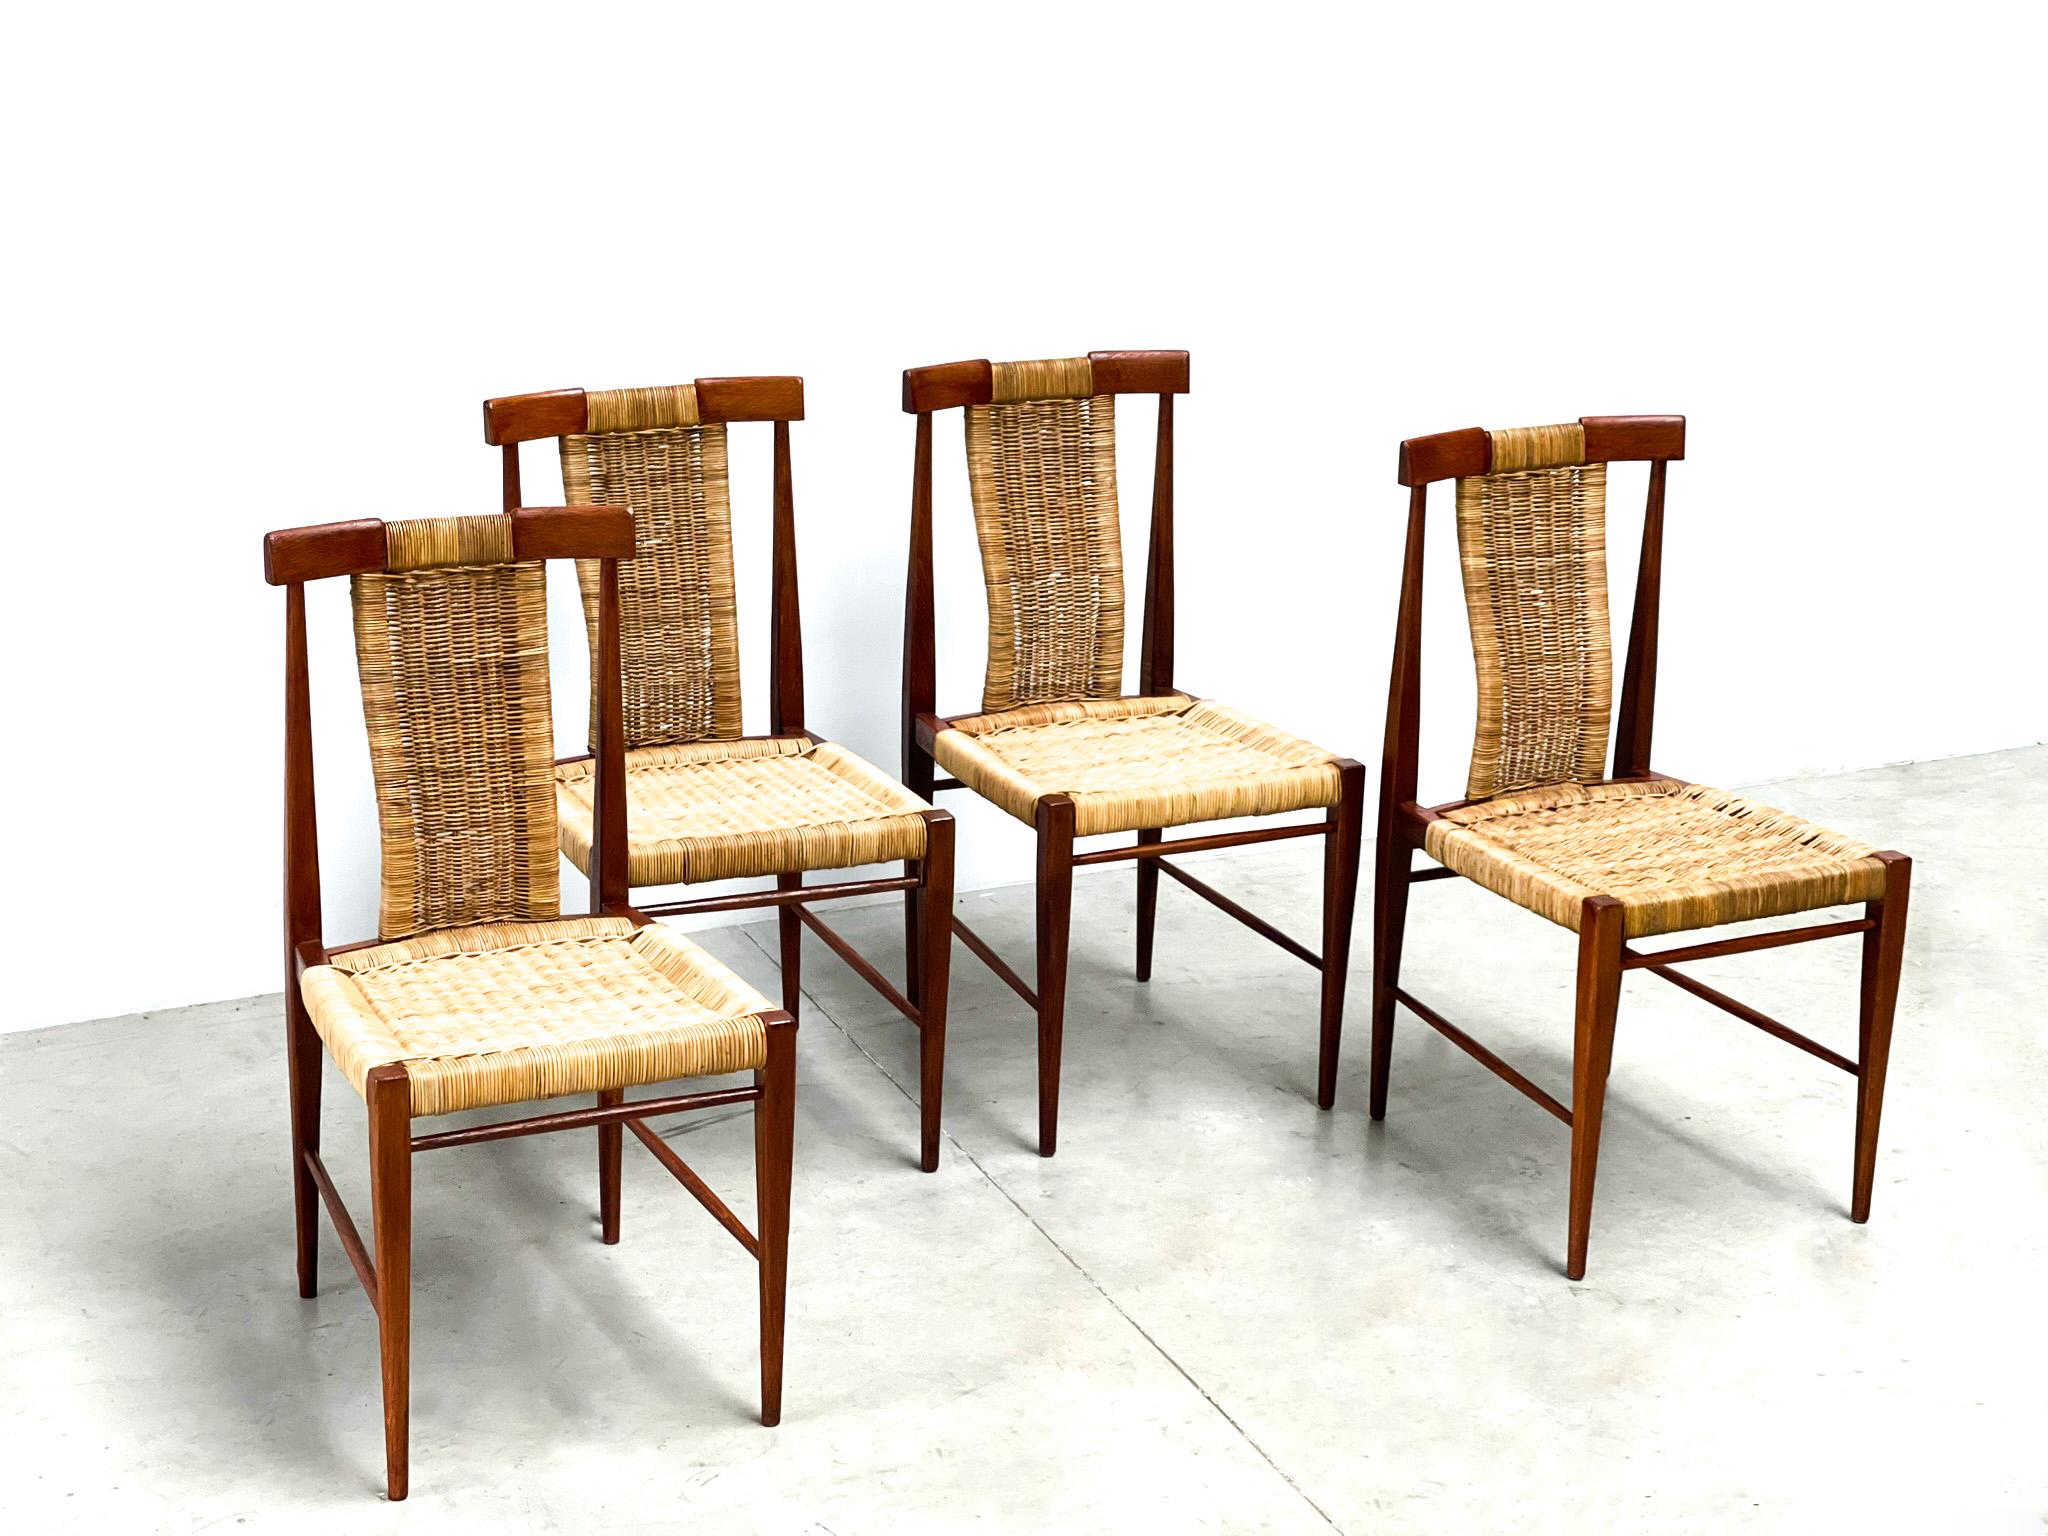 Italian Vintage Teak and Wicker Dining Chairs, 1960s For Sale